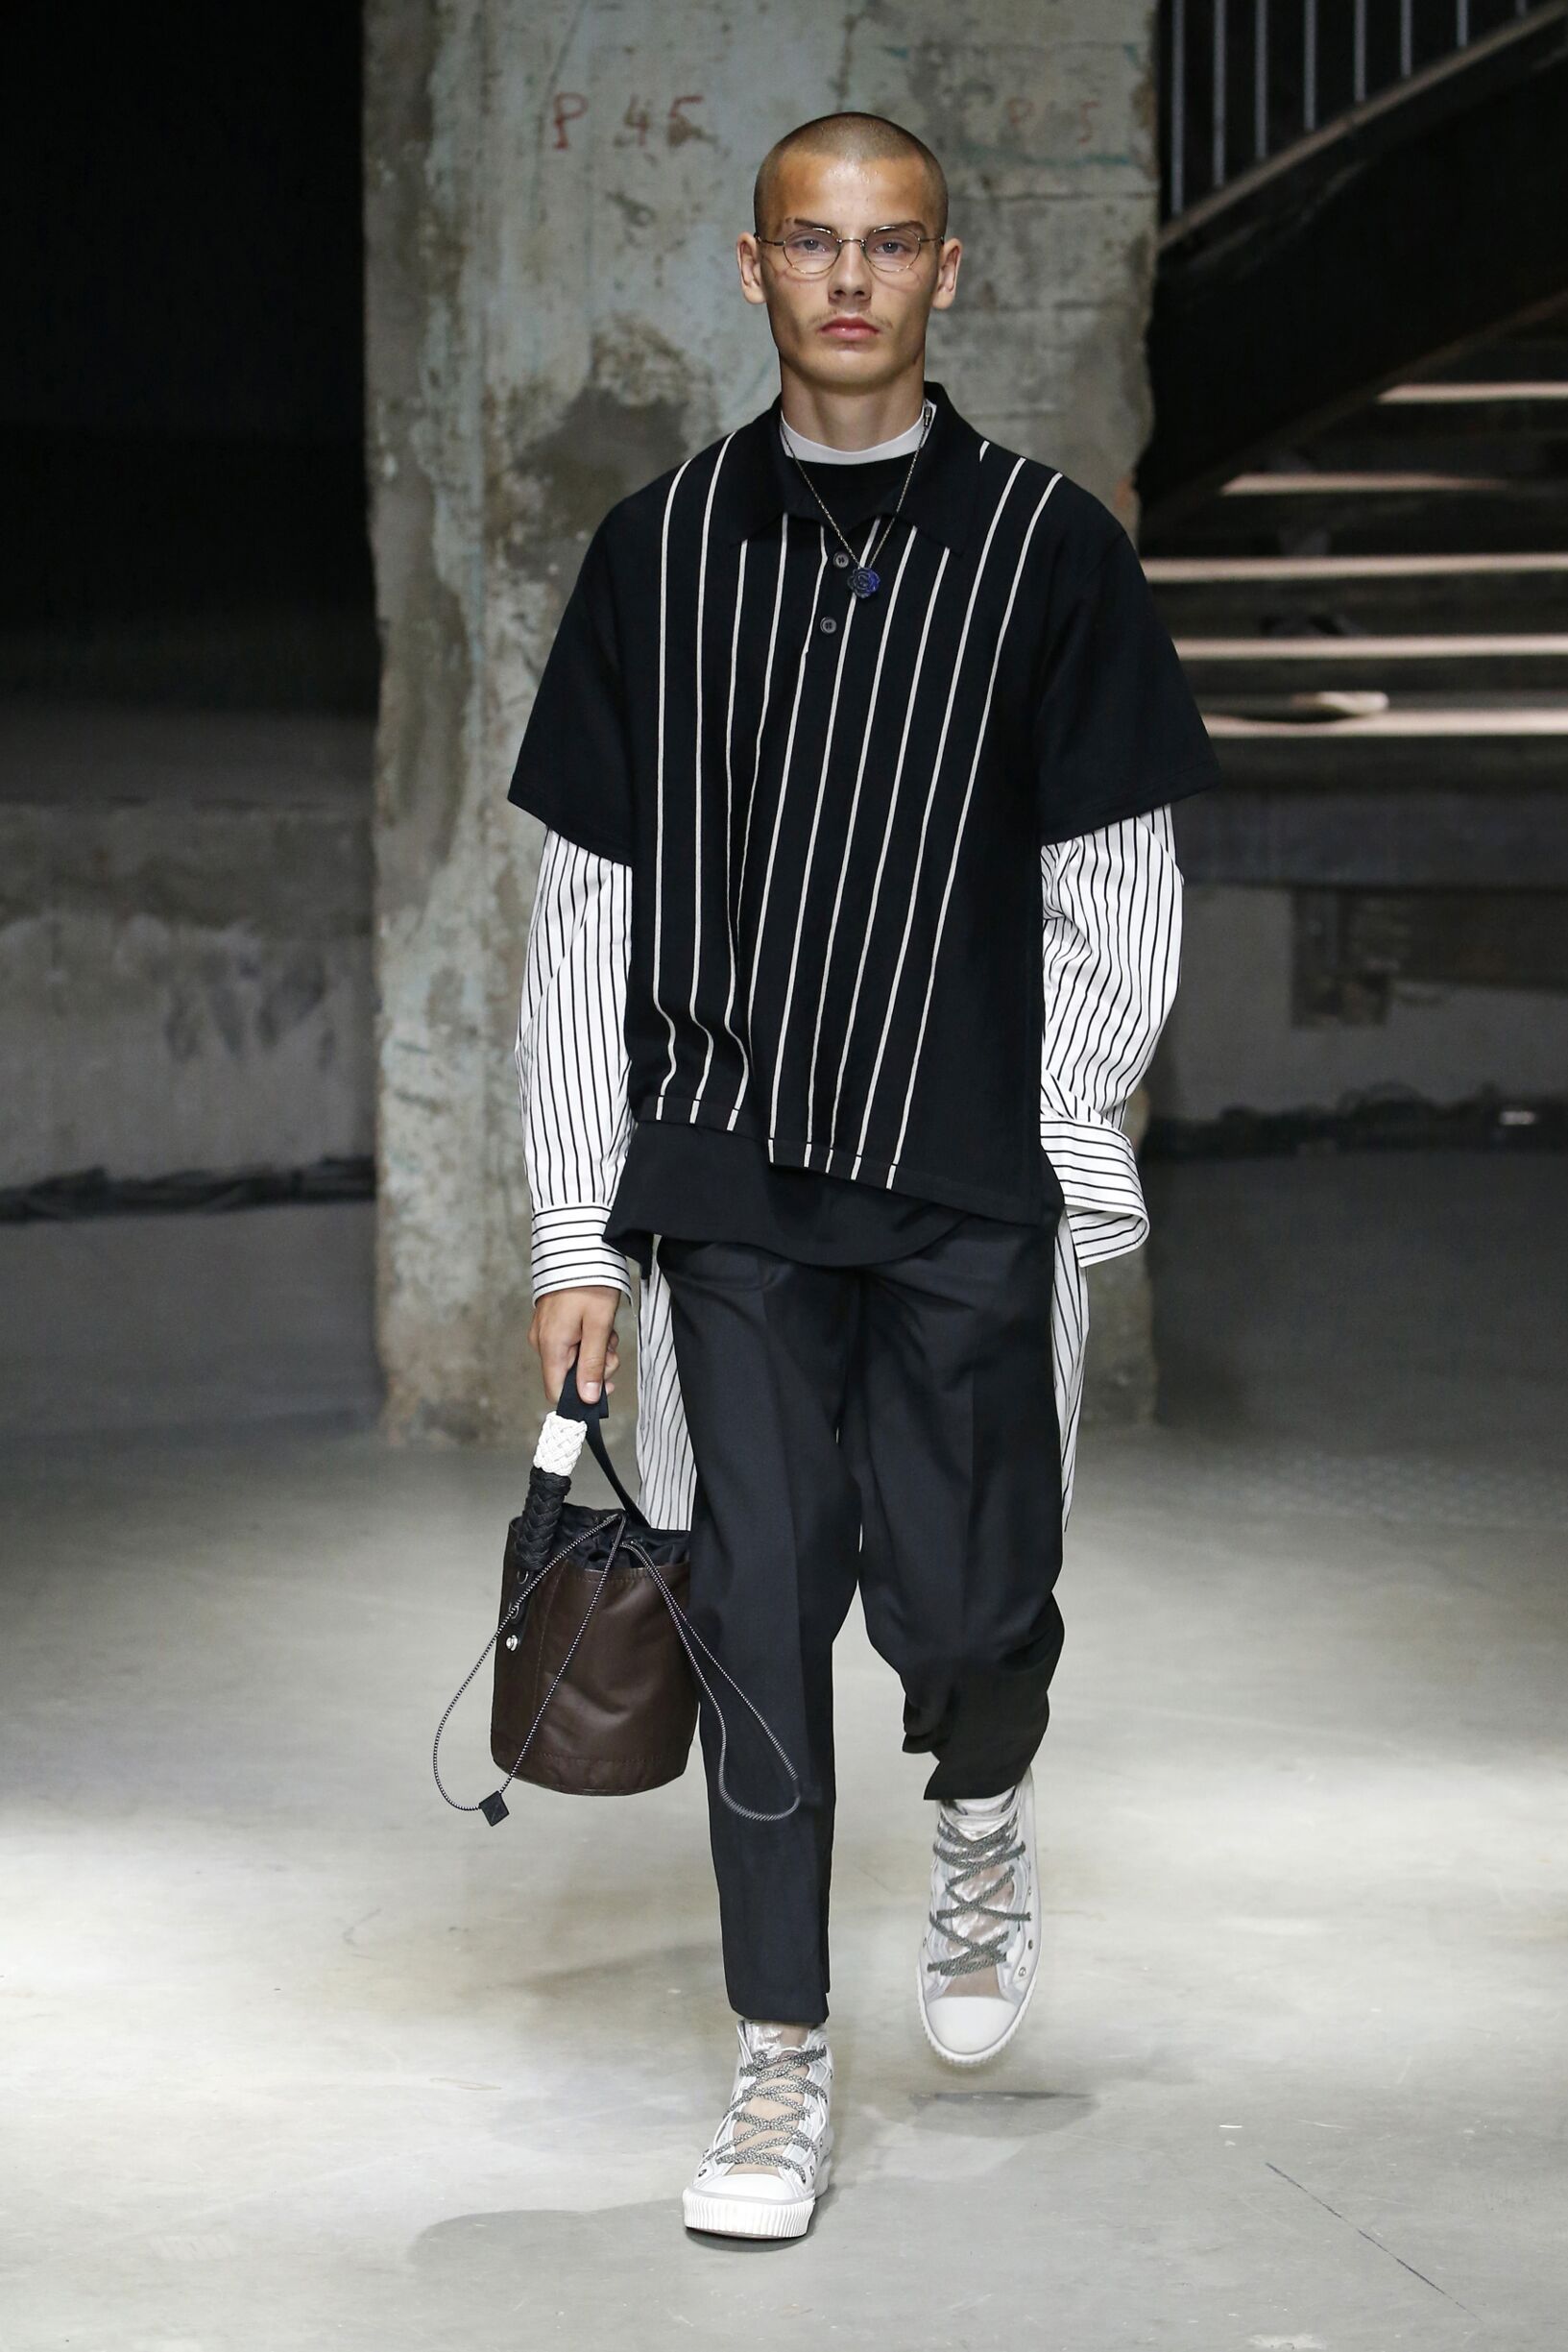 LANVIN SPRING SUMMER 2019 MEN'S COLLECTION | The Skinny Beep